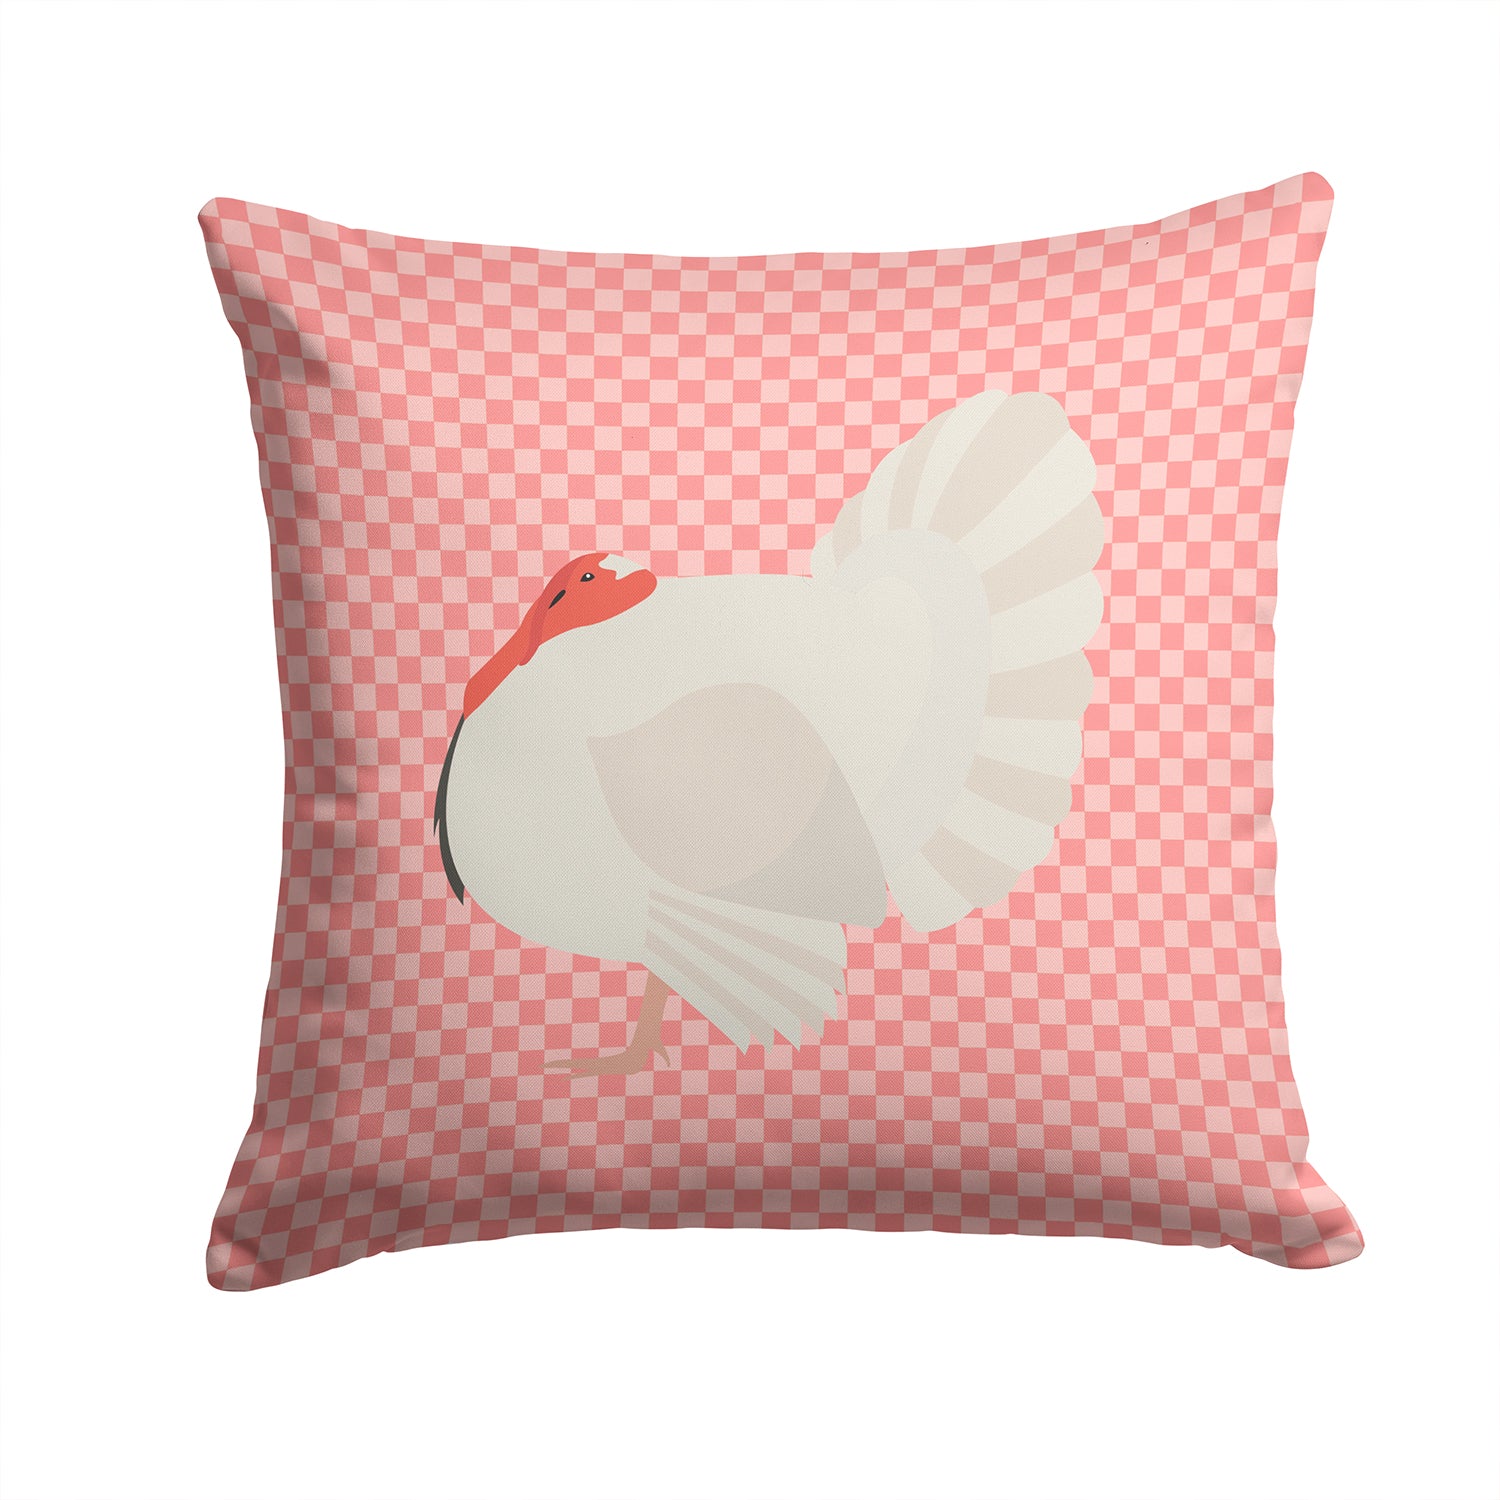 White Holland Turkey Pink Check Fabric Decorative Pillow BB7983PW1414 - the-store.com